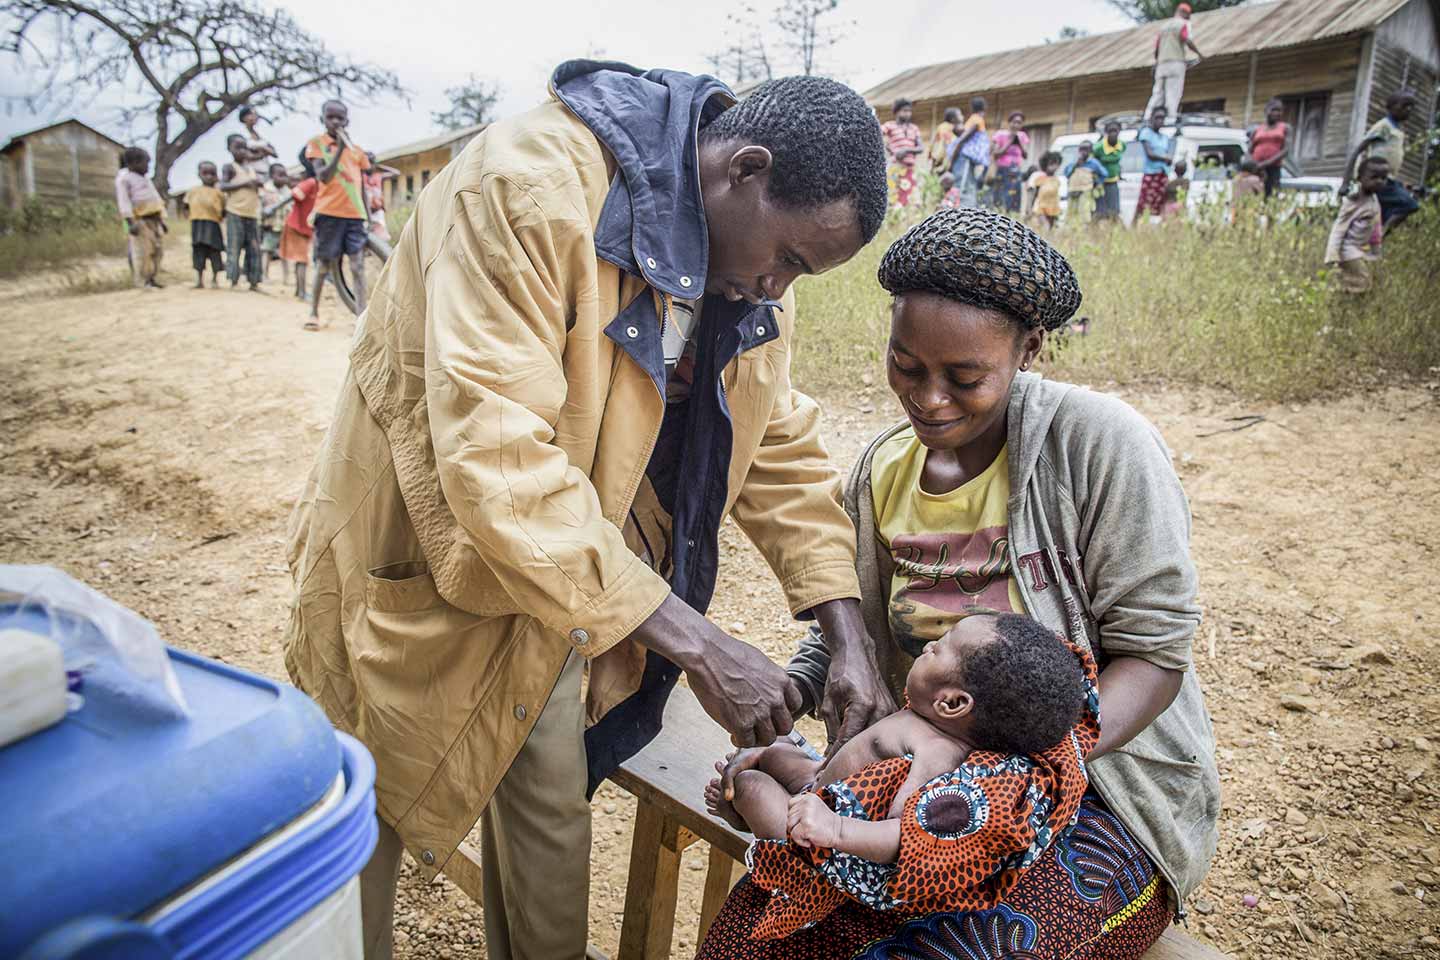 The Republic of Congo takes measures with improving child health by introducing the pneumococcal vaccine, which protects children against one of the leading causes of pneumonia. Gavi/2013/Evelyn Hockstein